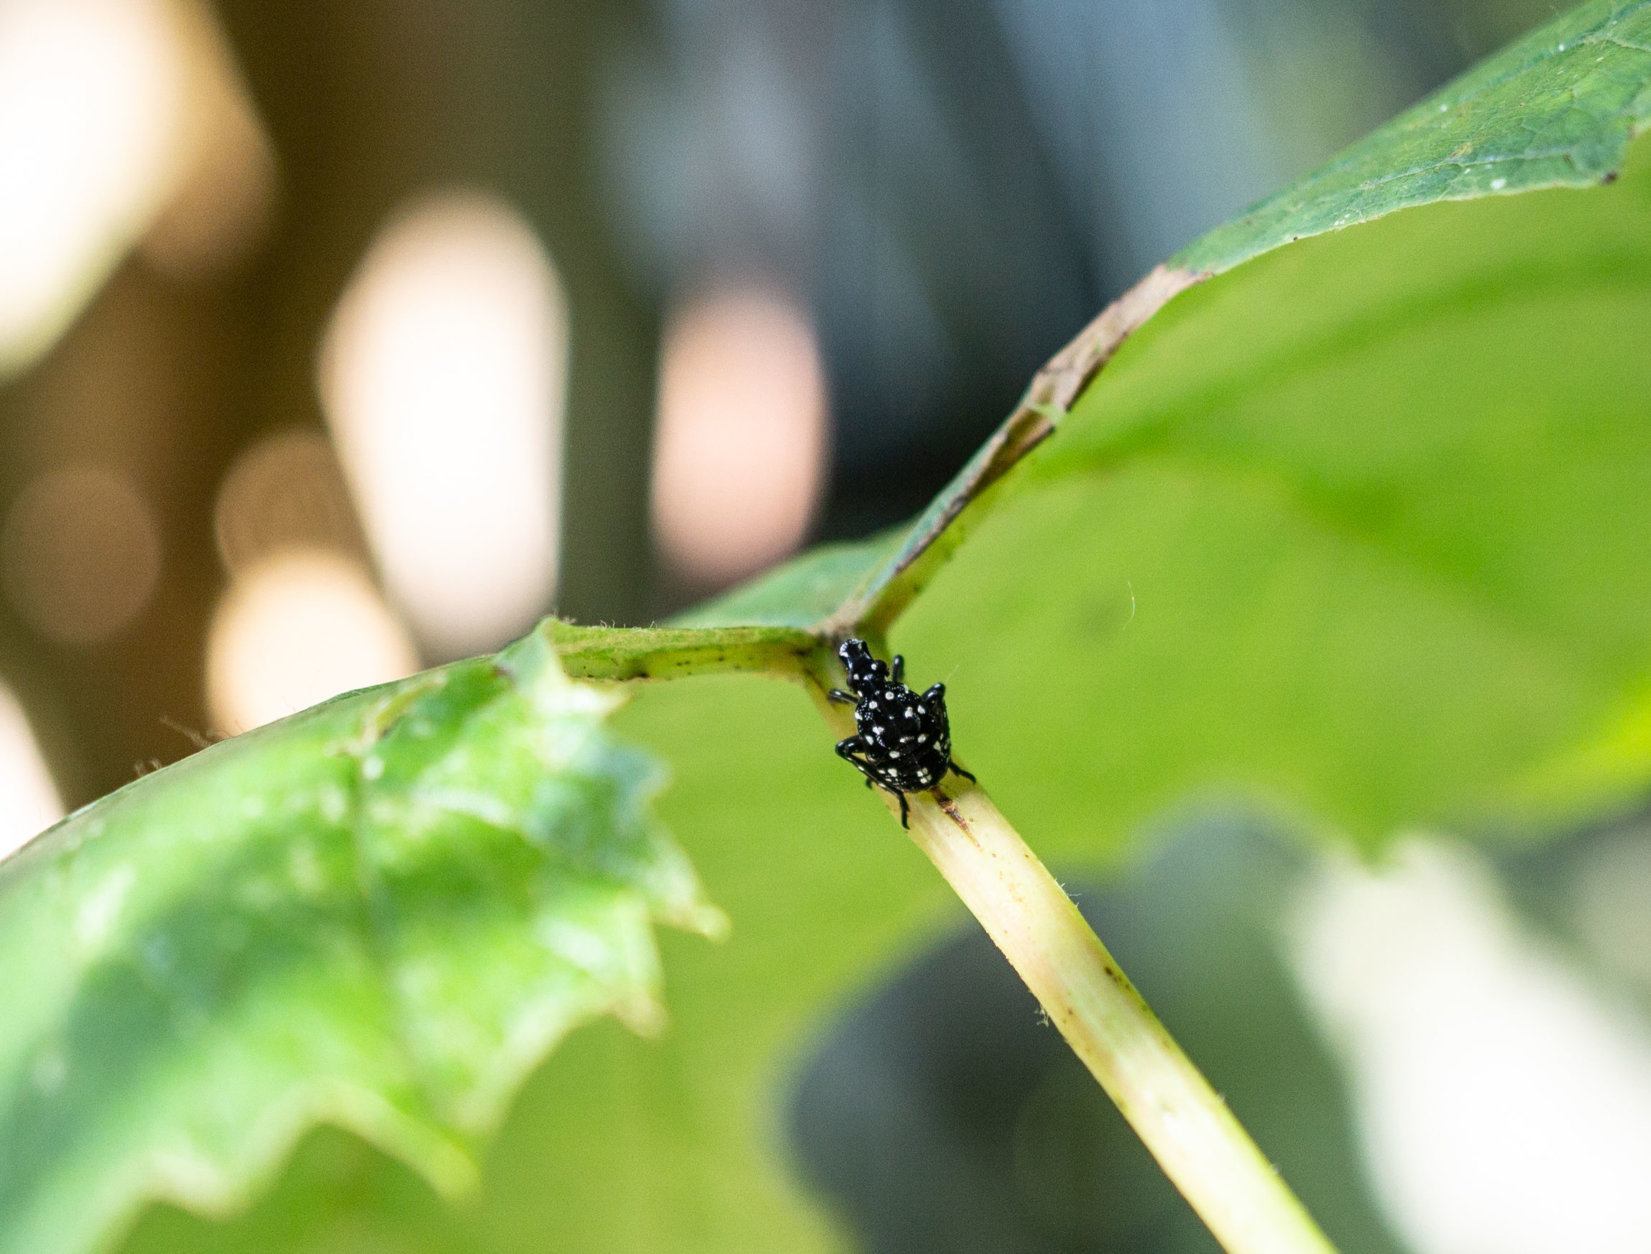 Close-up of black nymph stage on grape leaf. (Getty Images/iStockphoto)